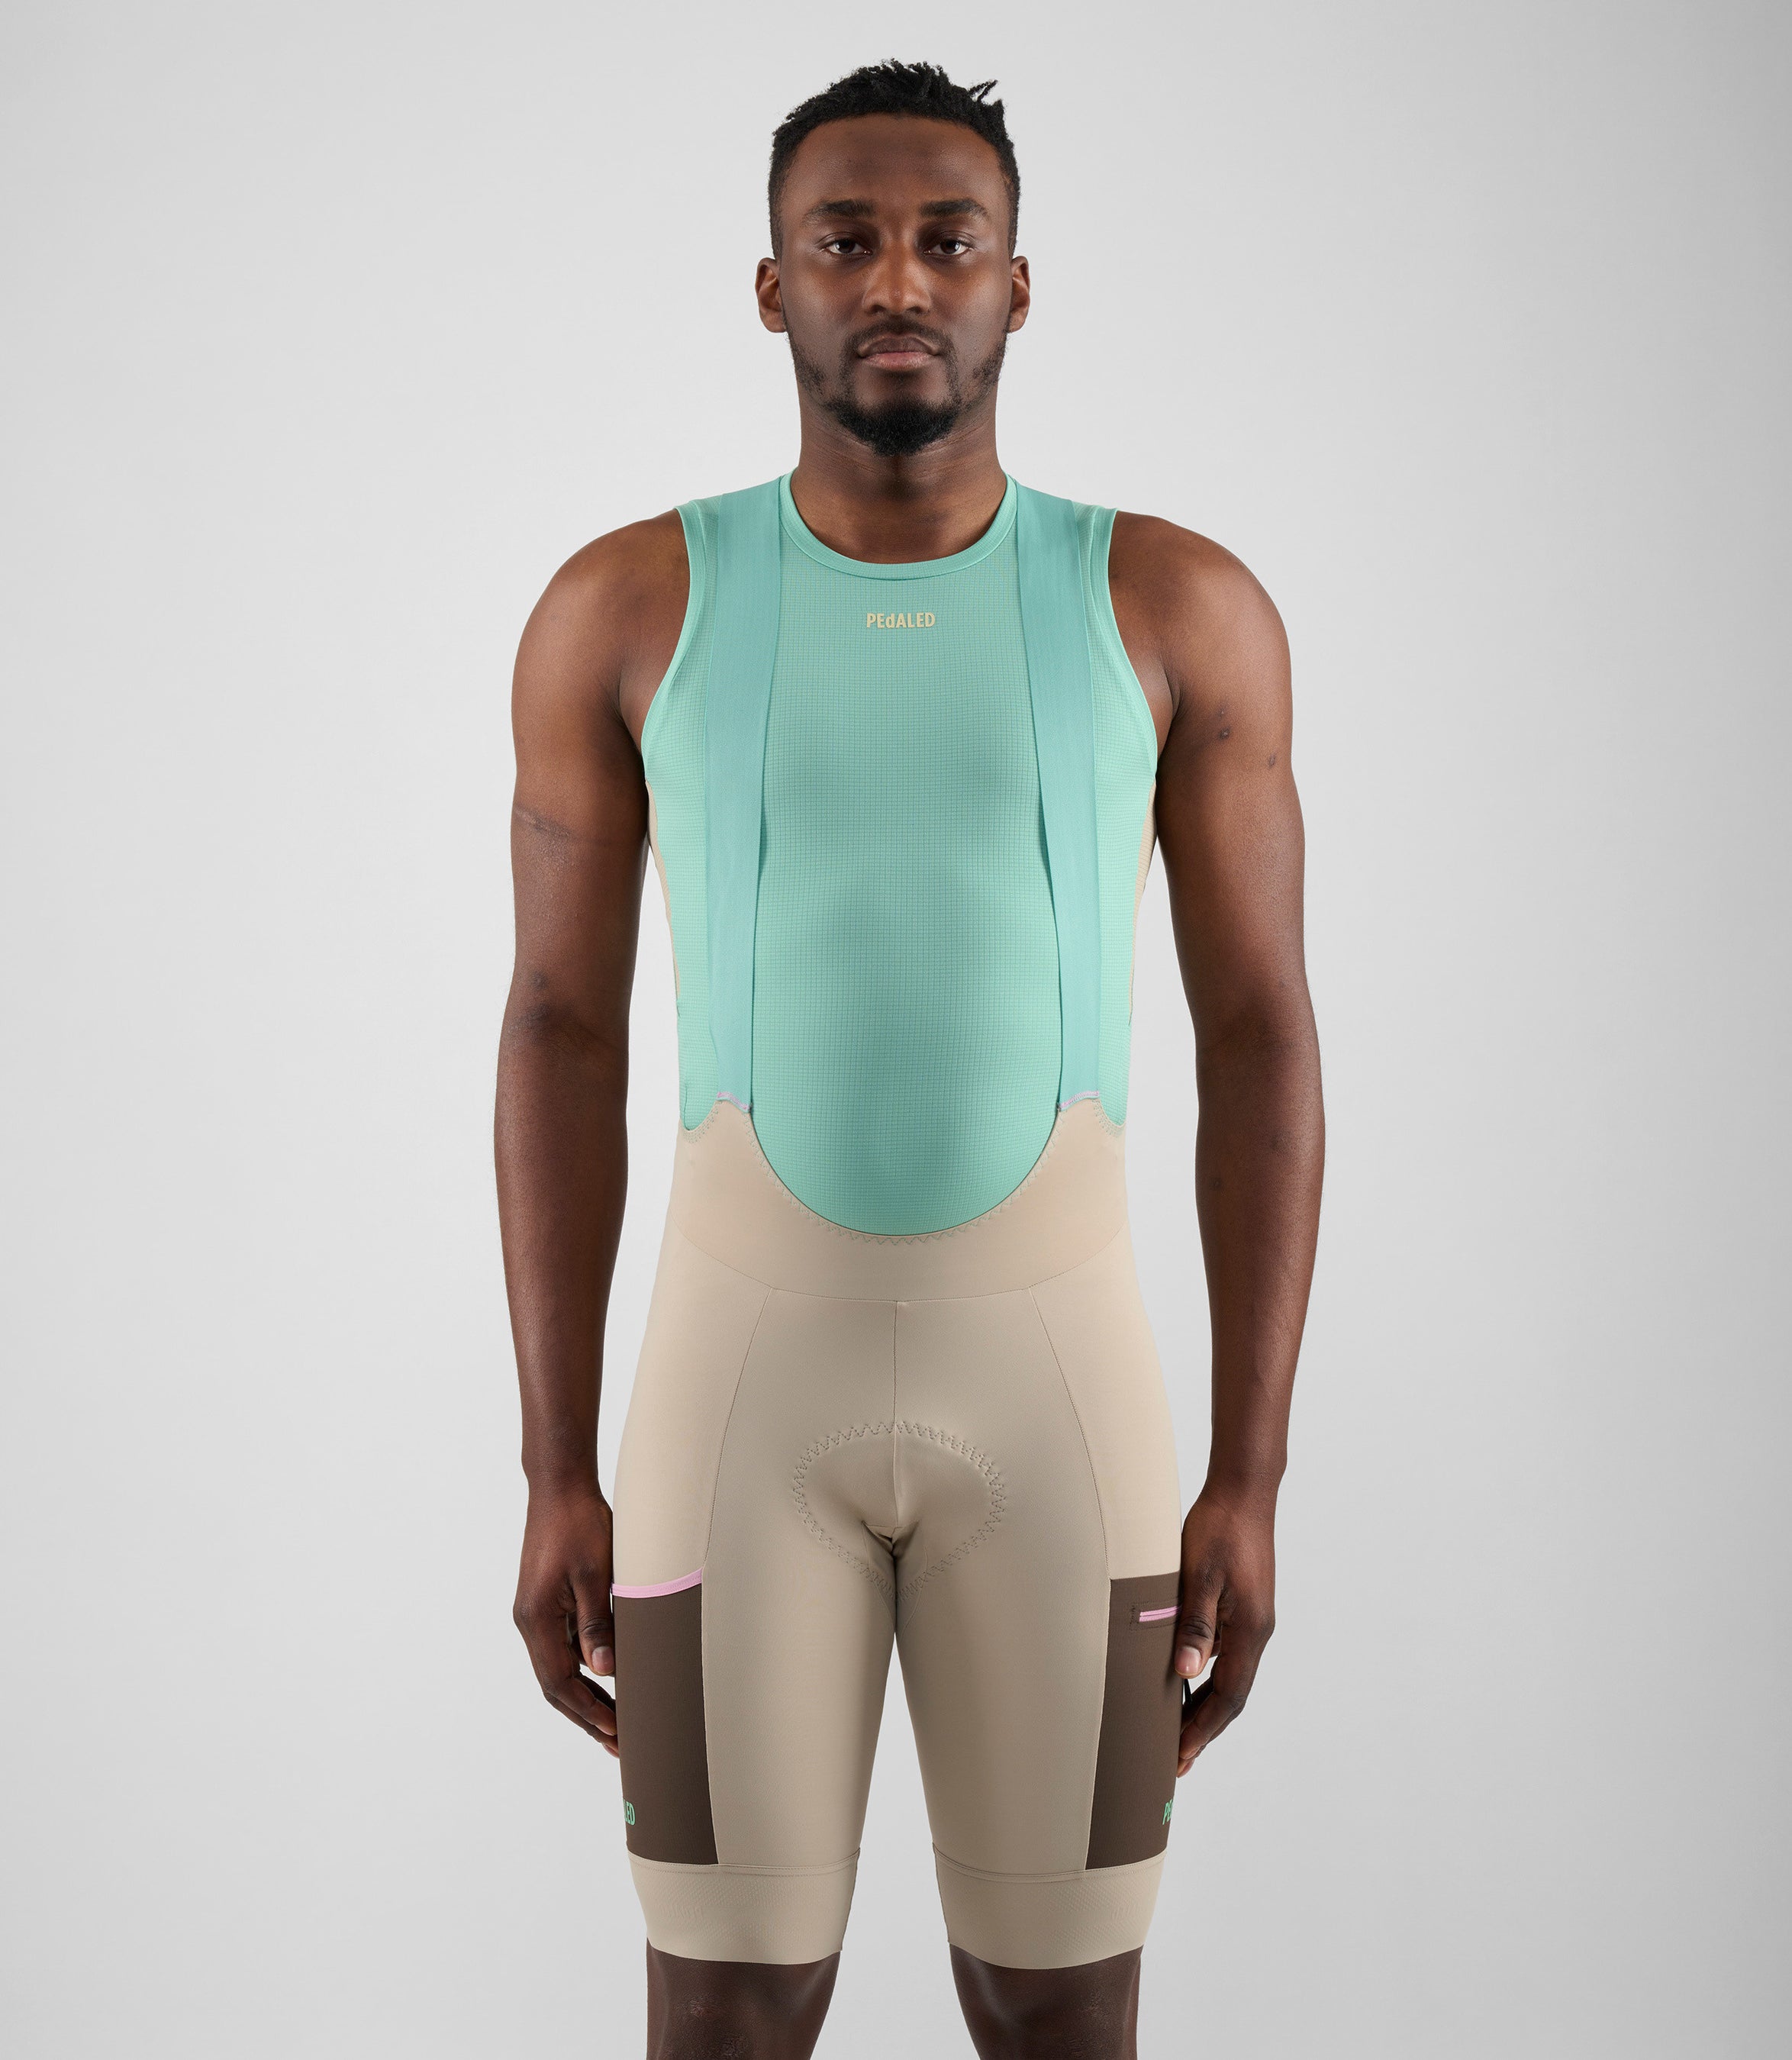 24SBLOD37PE_3_men base layer powerdry light green odyssey total body front pedaled